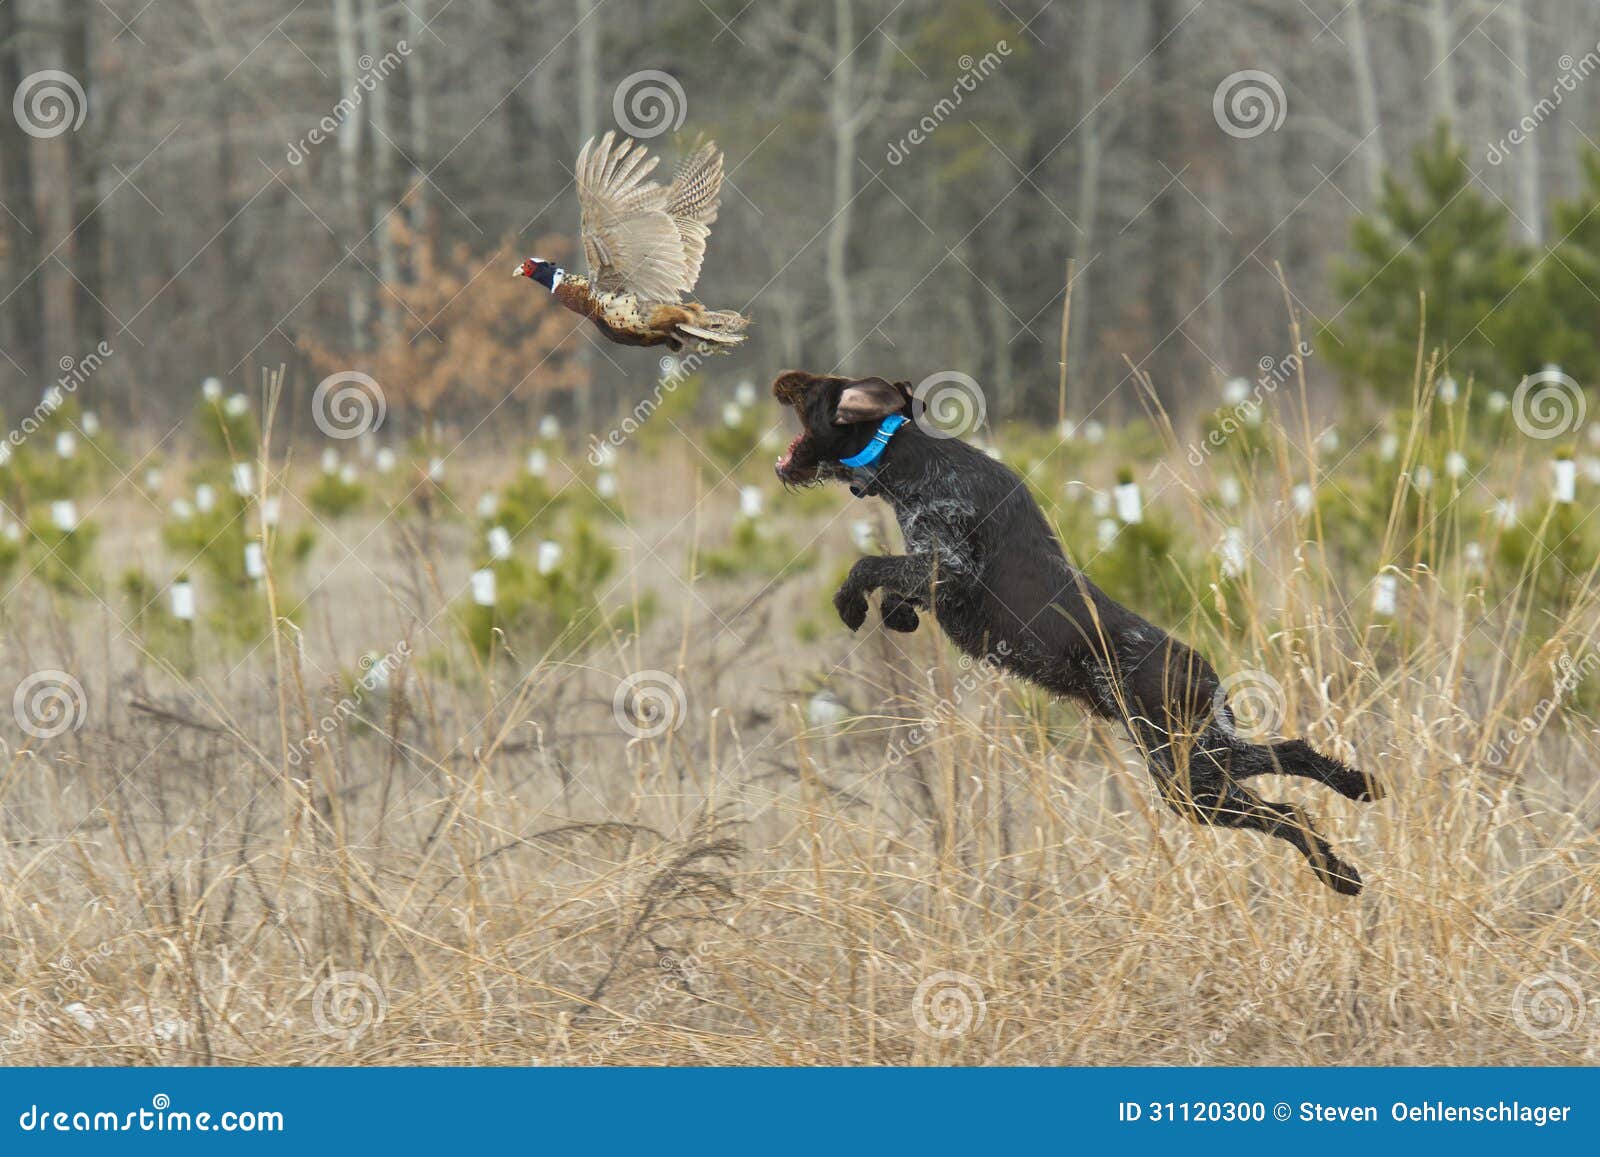 leaping hunting dog